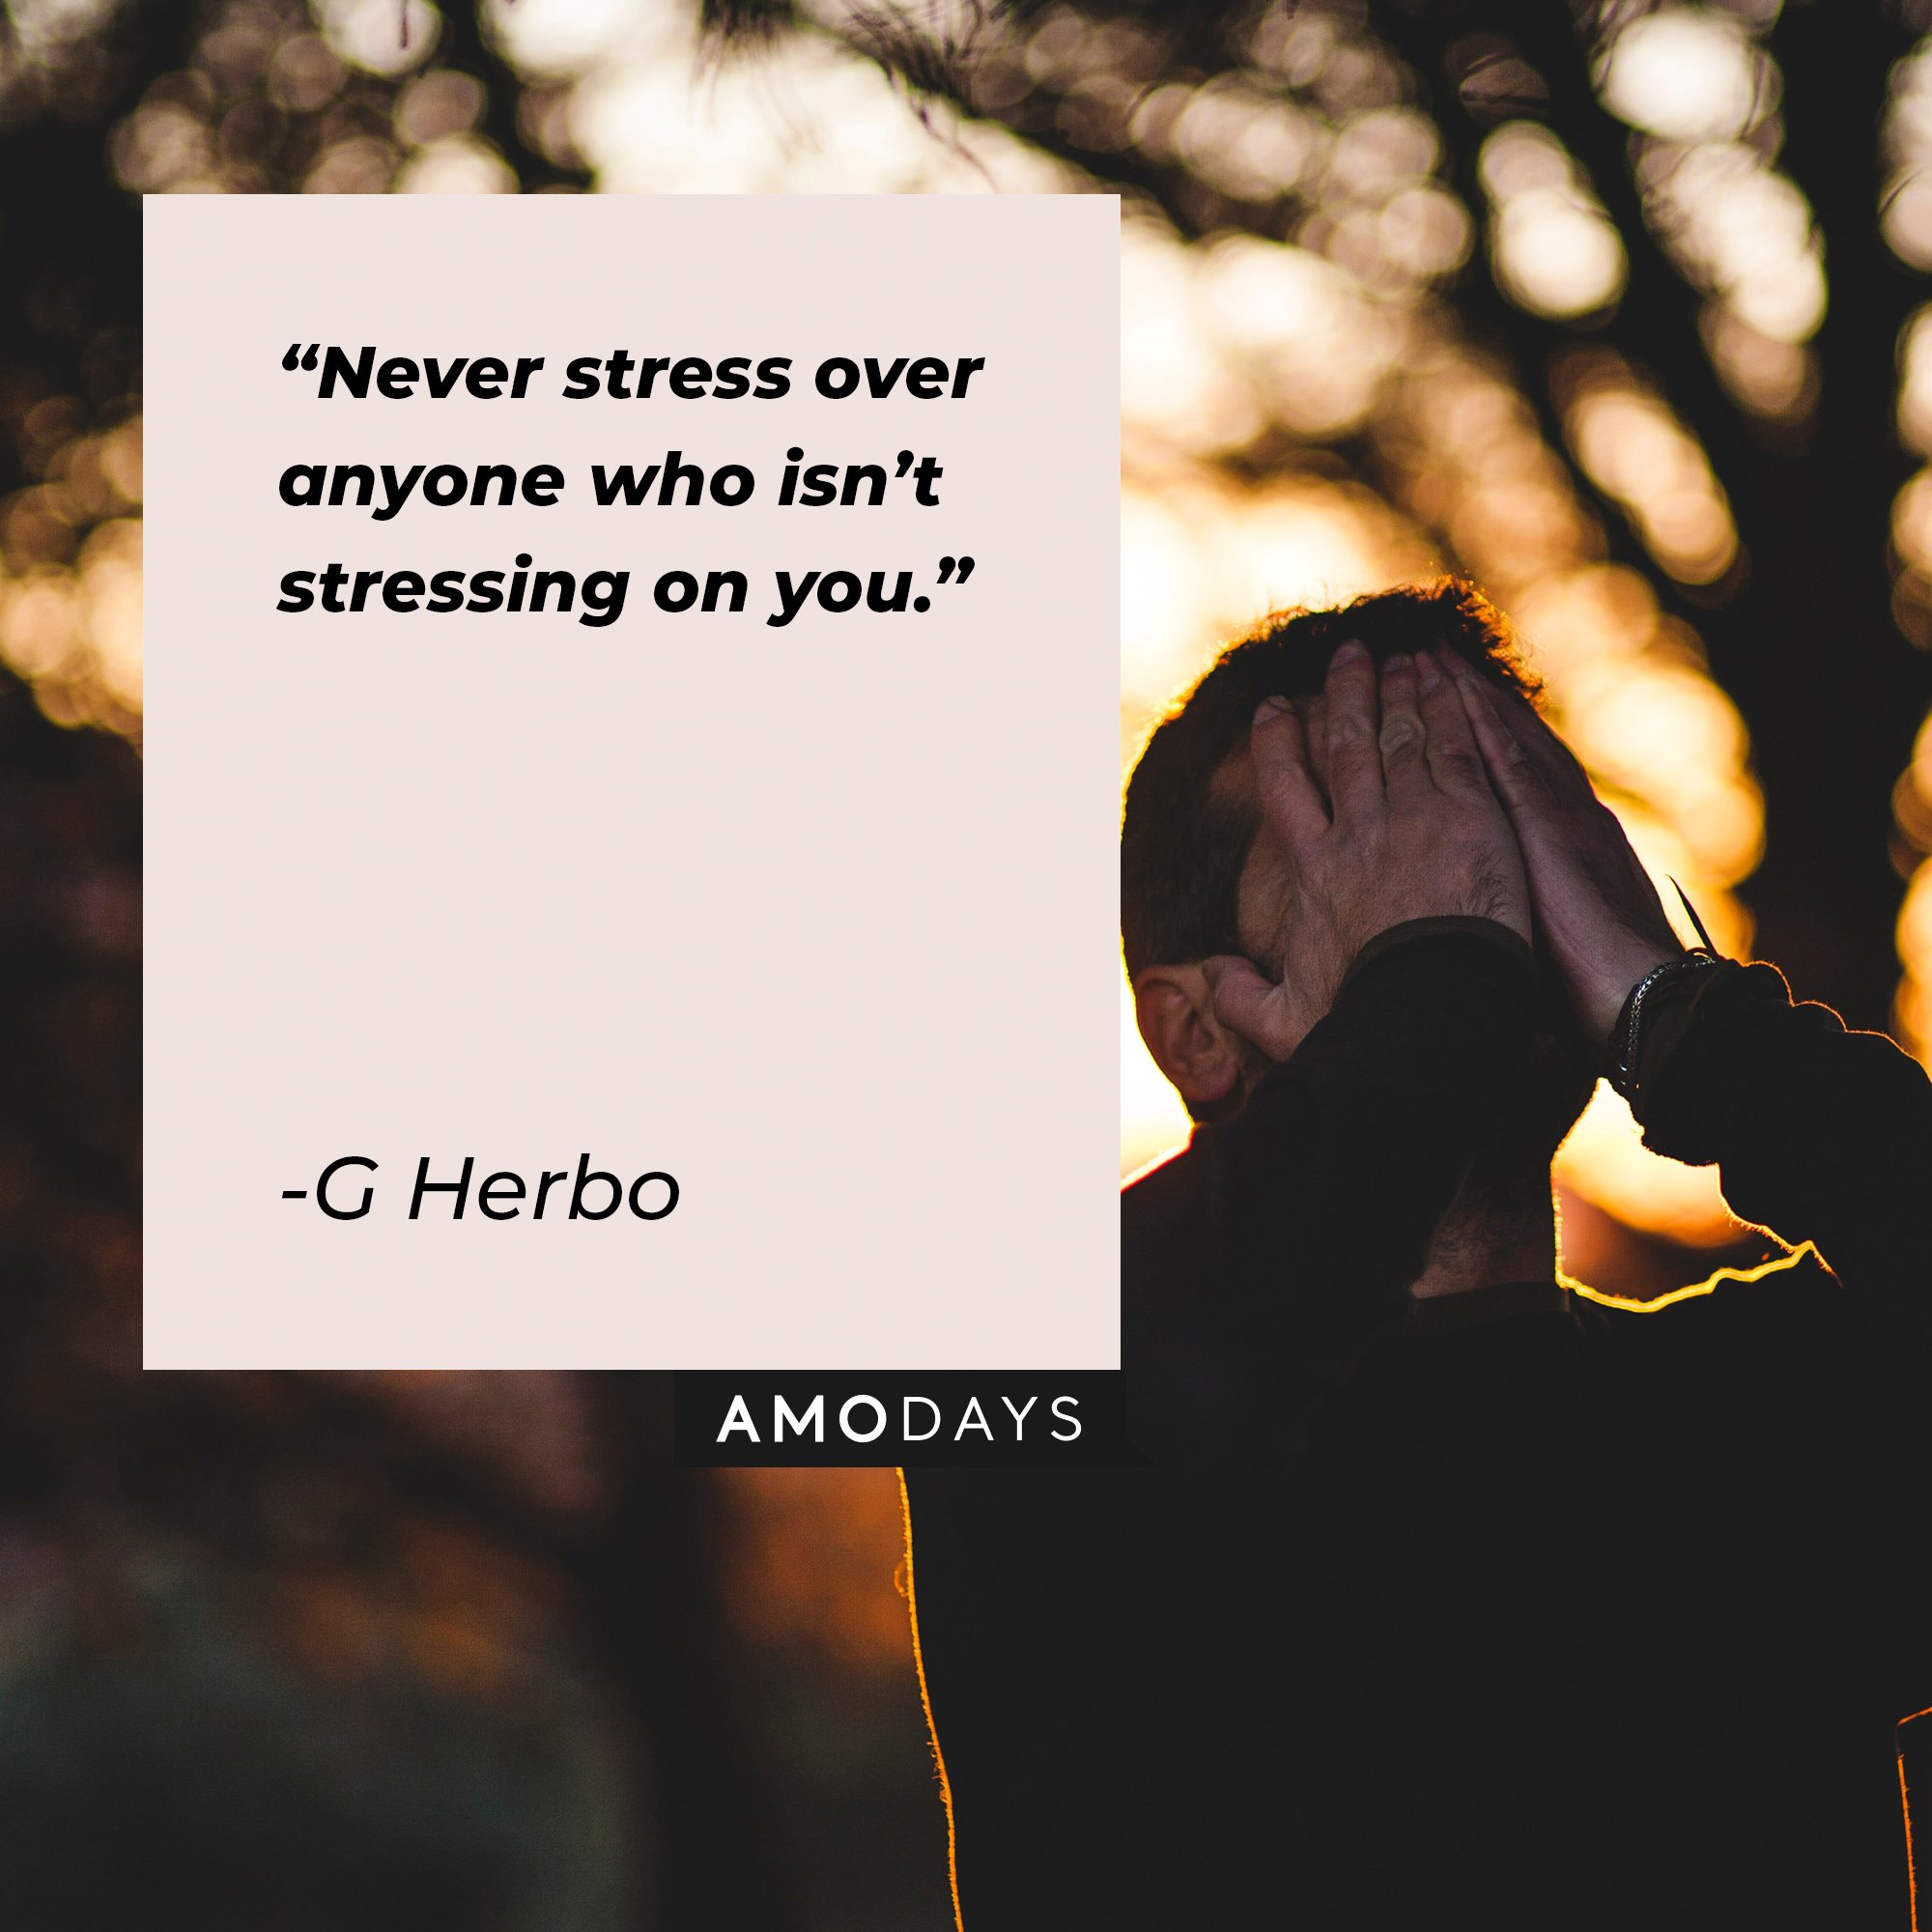 G Herbo’s quote: "Never stress over anyone who isn’t stressing on you" | Image: AmoDays 